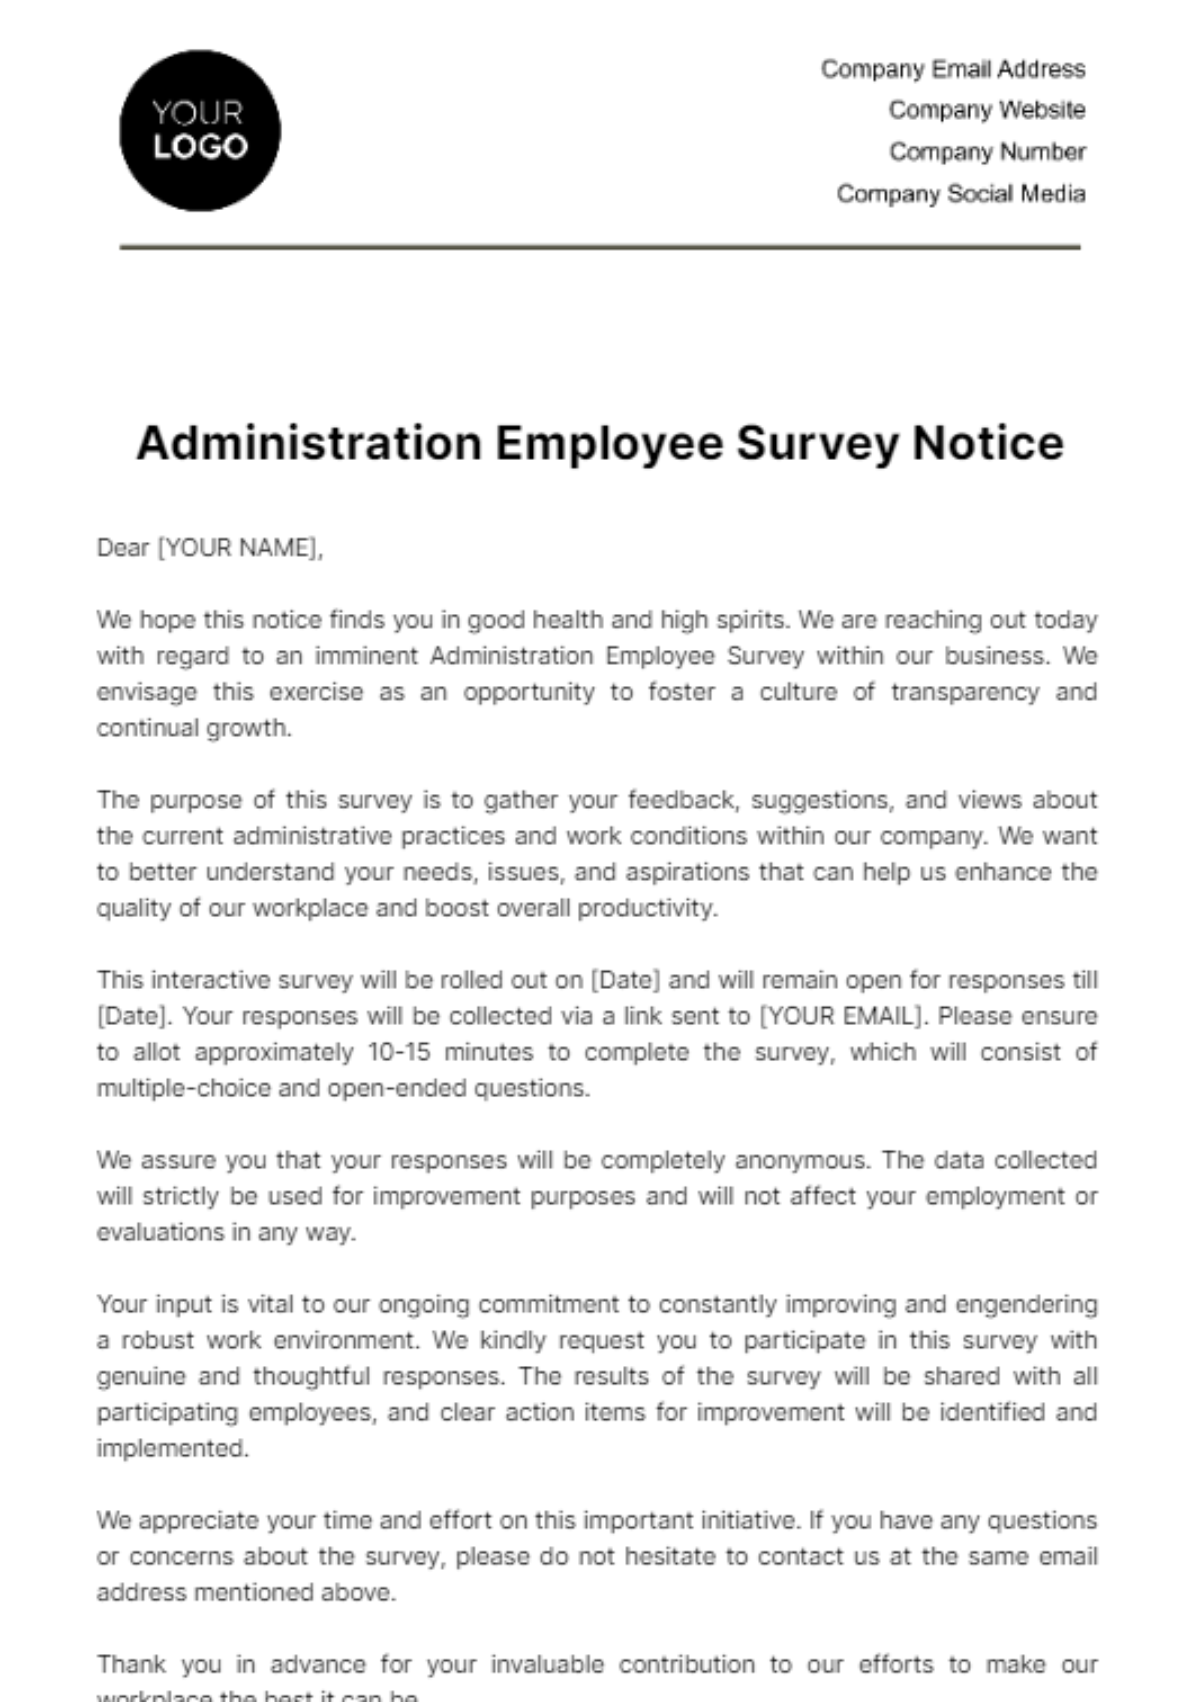 Free Administration Employee Survey Notice Template